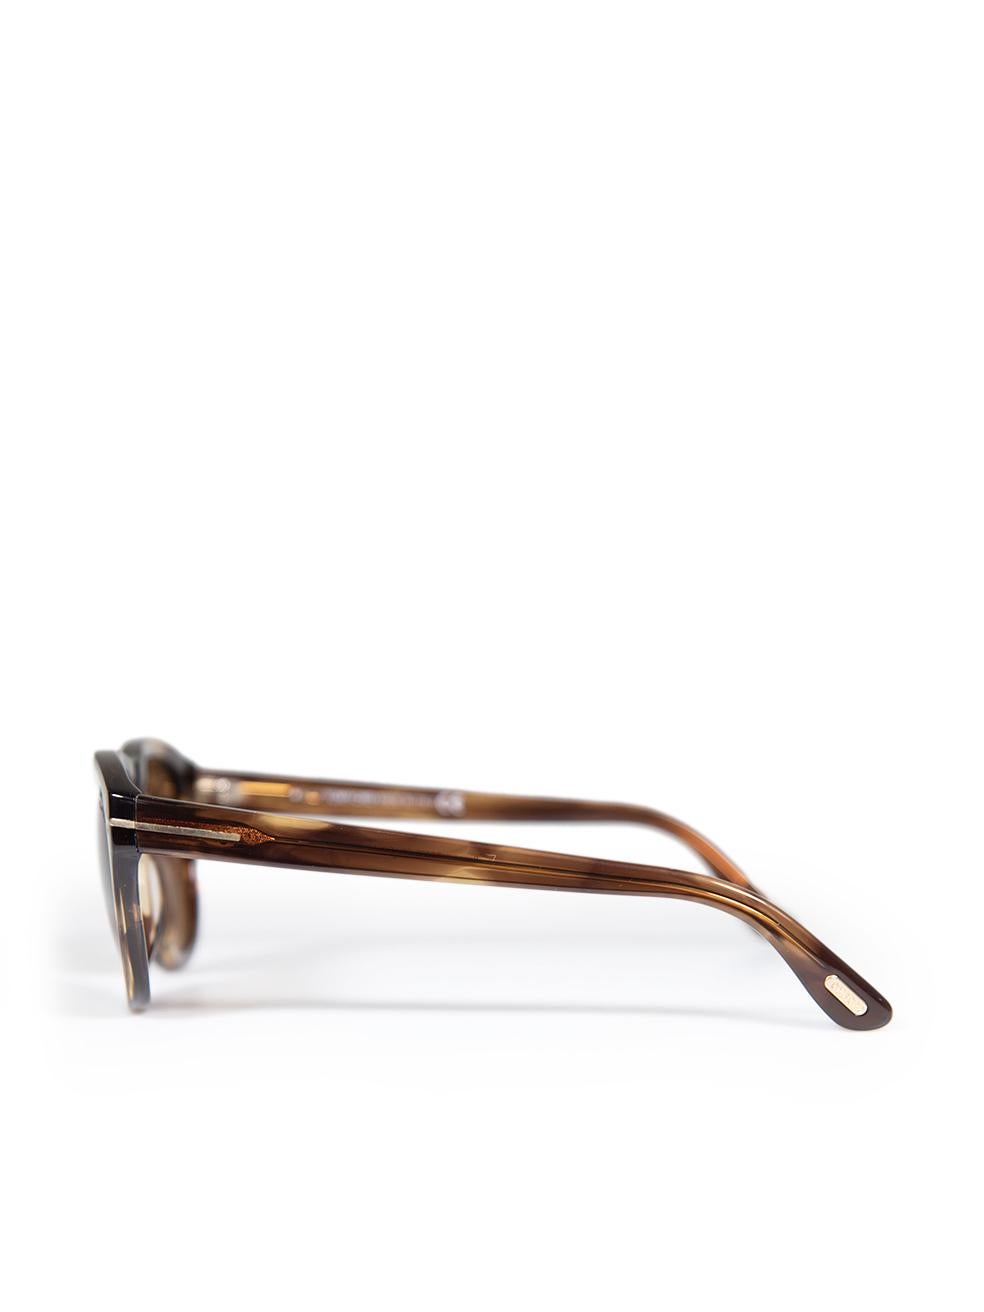 Tom Ford Brown Benedict Cat Eye Sunglasses For Sale 1